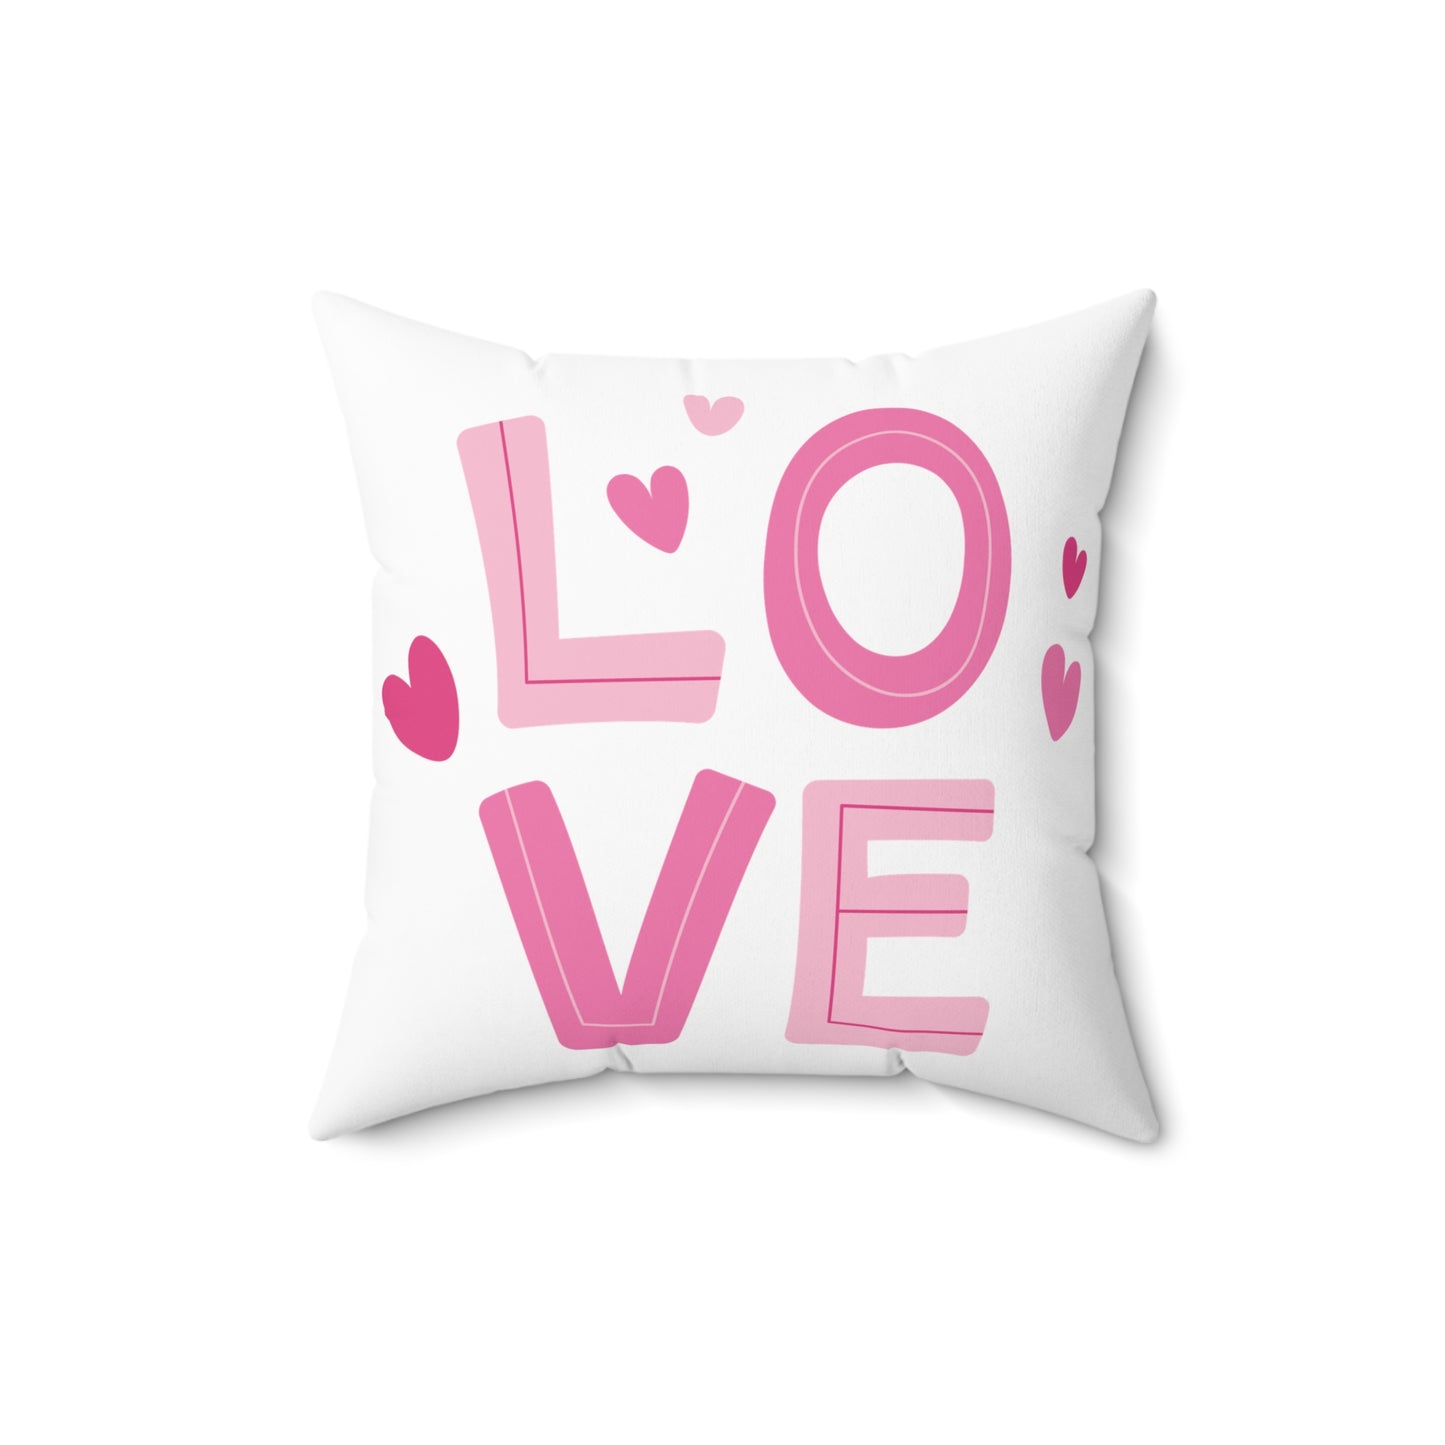 Love with Hearts Printed Polyester Sqaure Pillow Case for Valentine